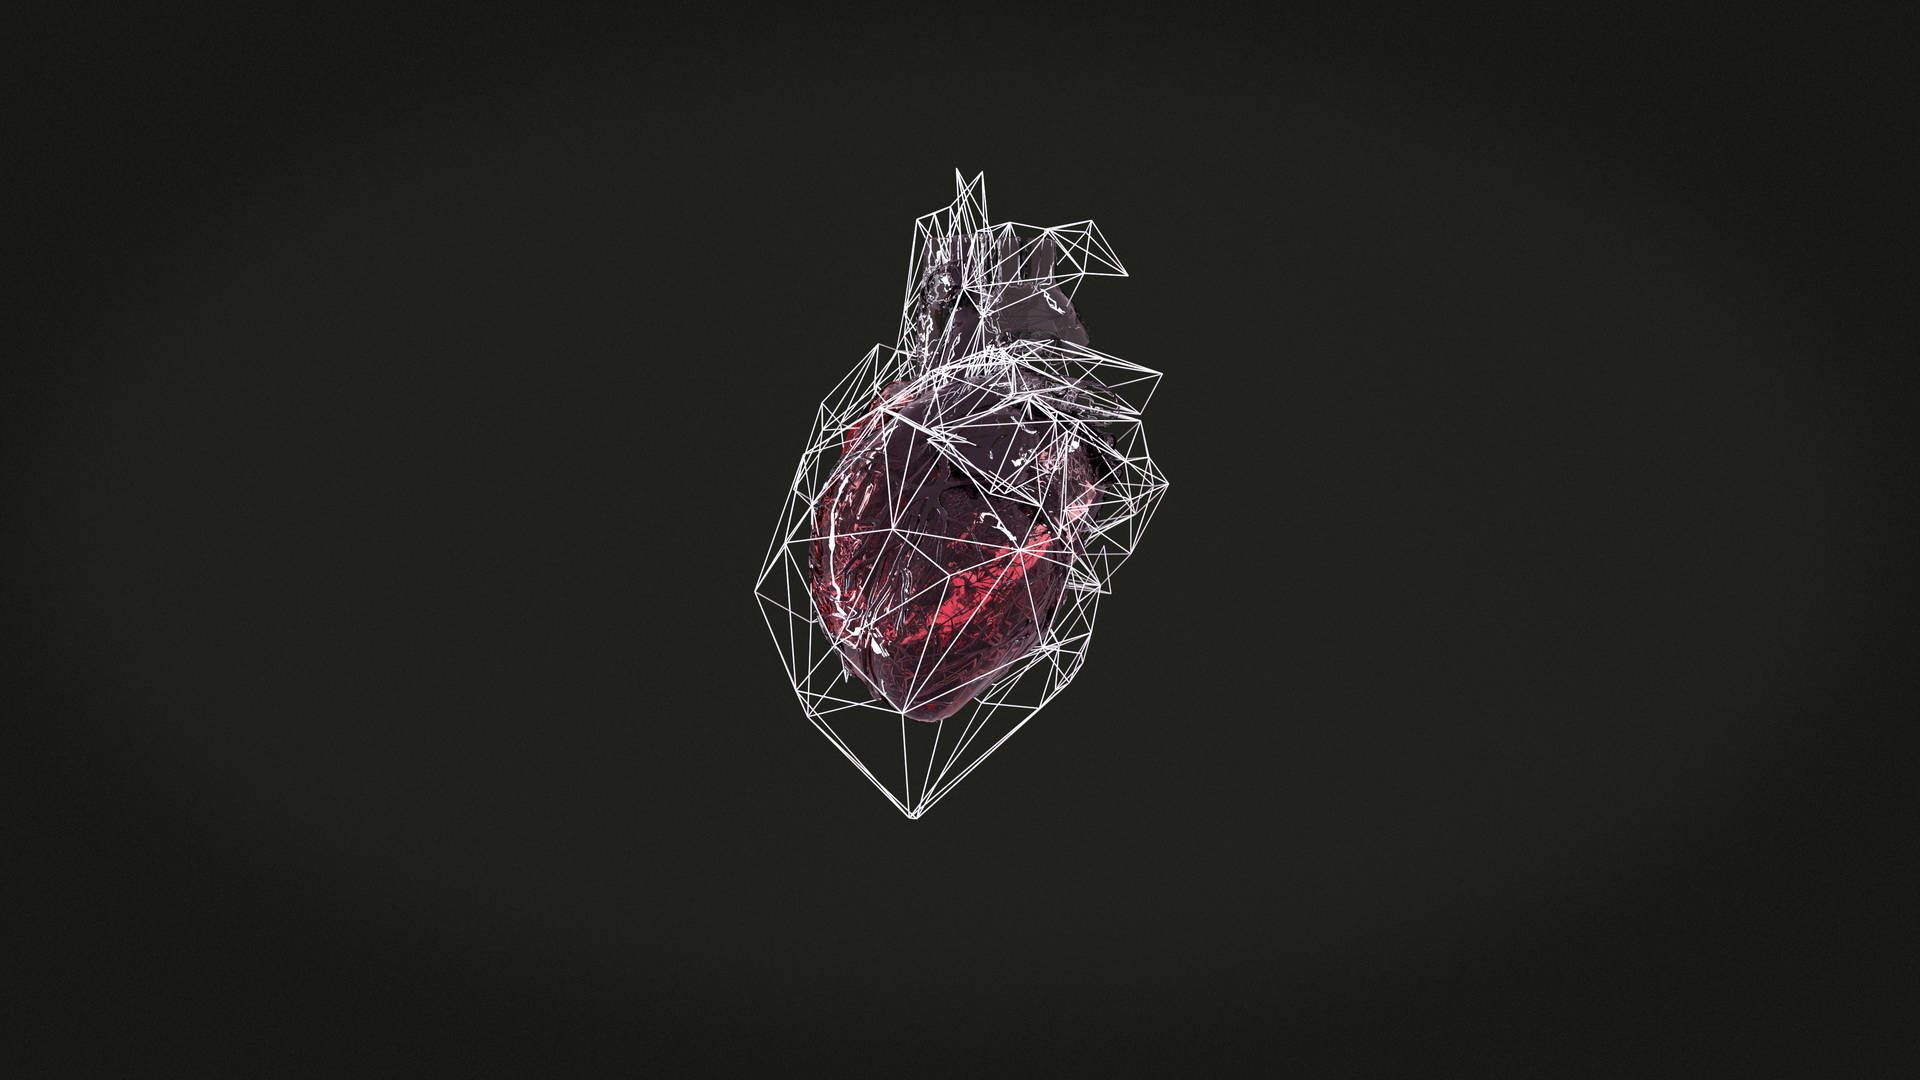 3D illustration of a heart with lines - Anatomy, heart, black heart